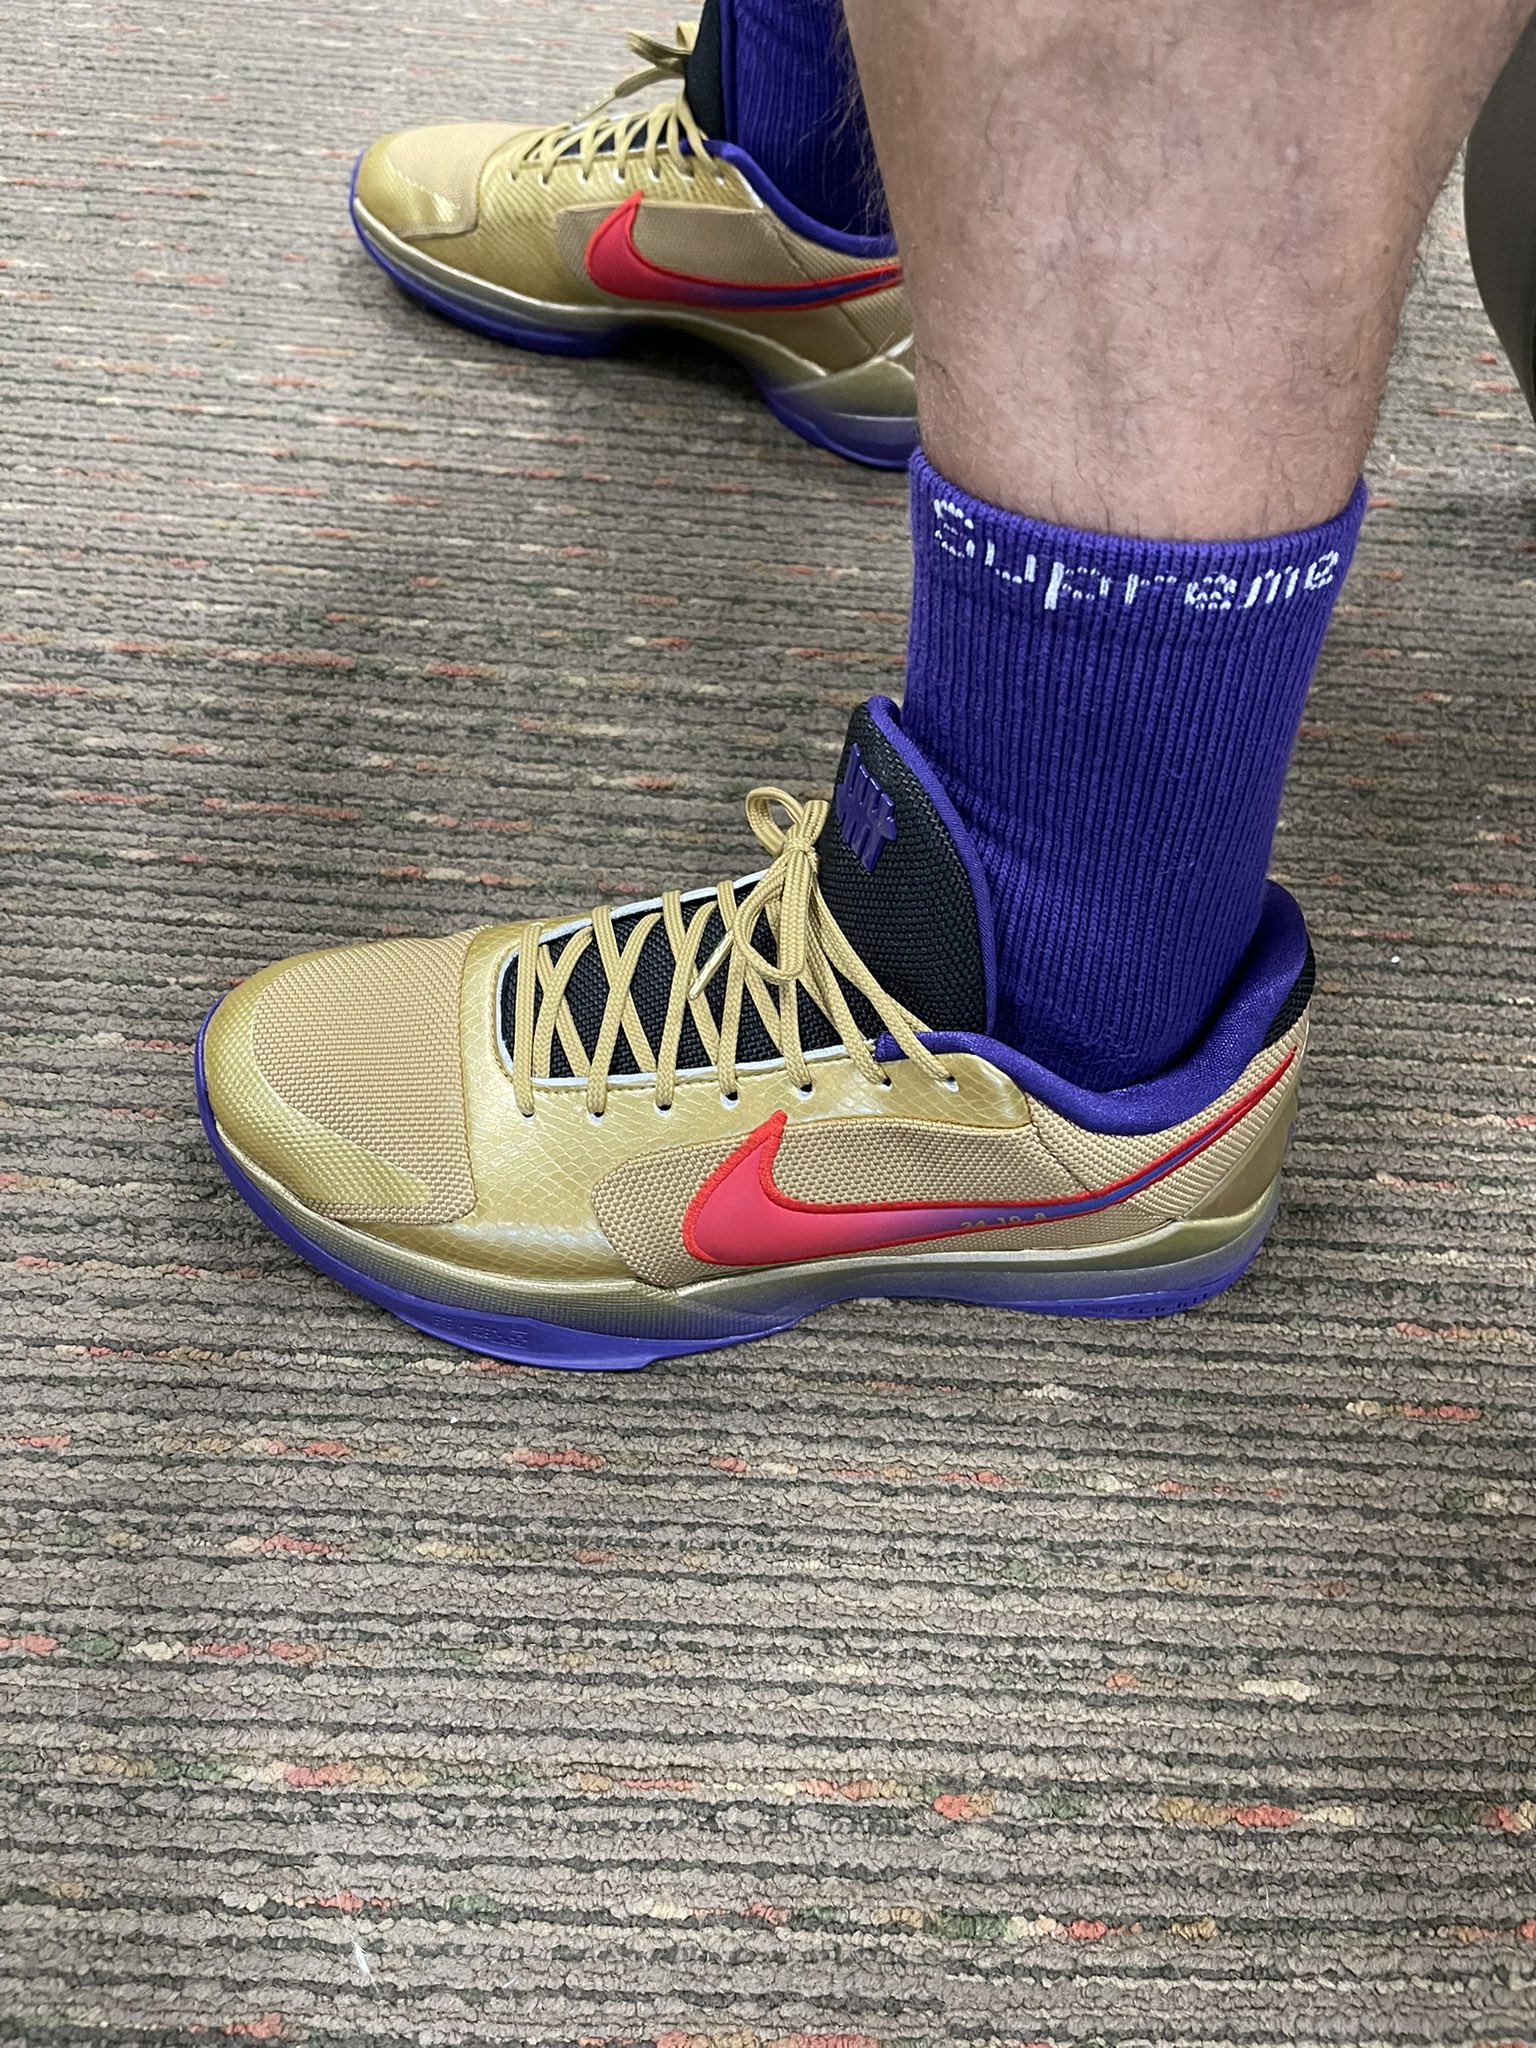 Dylan Gemelli on X: Another Ultimate Kobe Shoe! The special hall of fame  edition with the undefeated and Nike collab with a full Kobe Bryant outfit  and supreme socks 🔥🔥🔥 Nike X